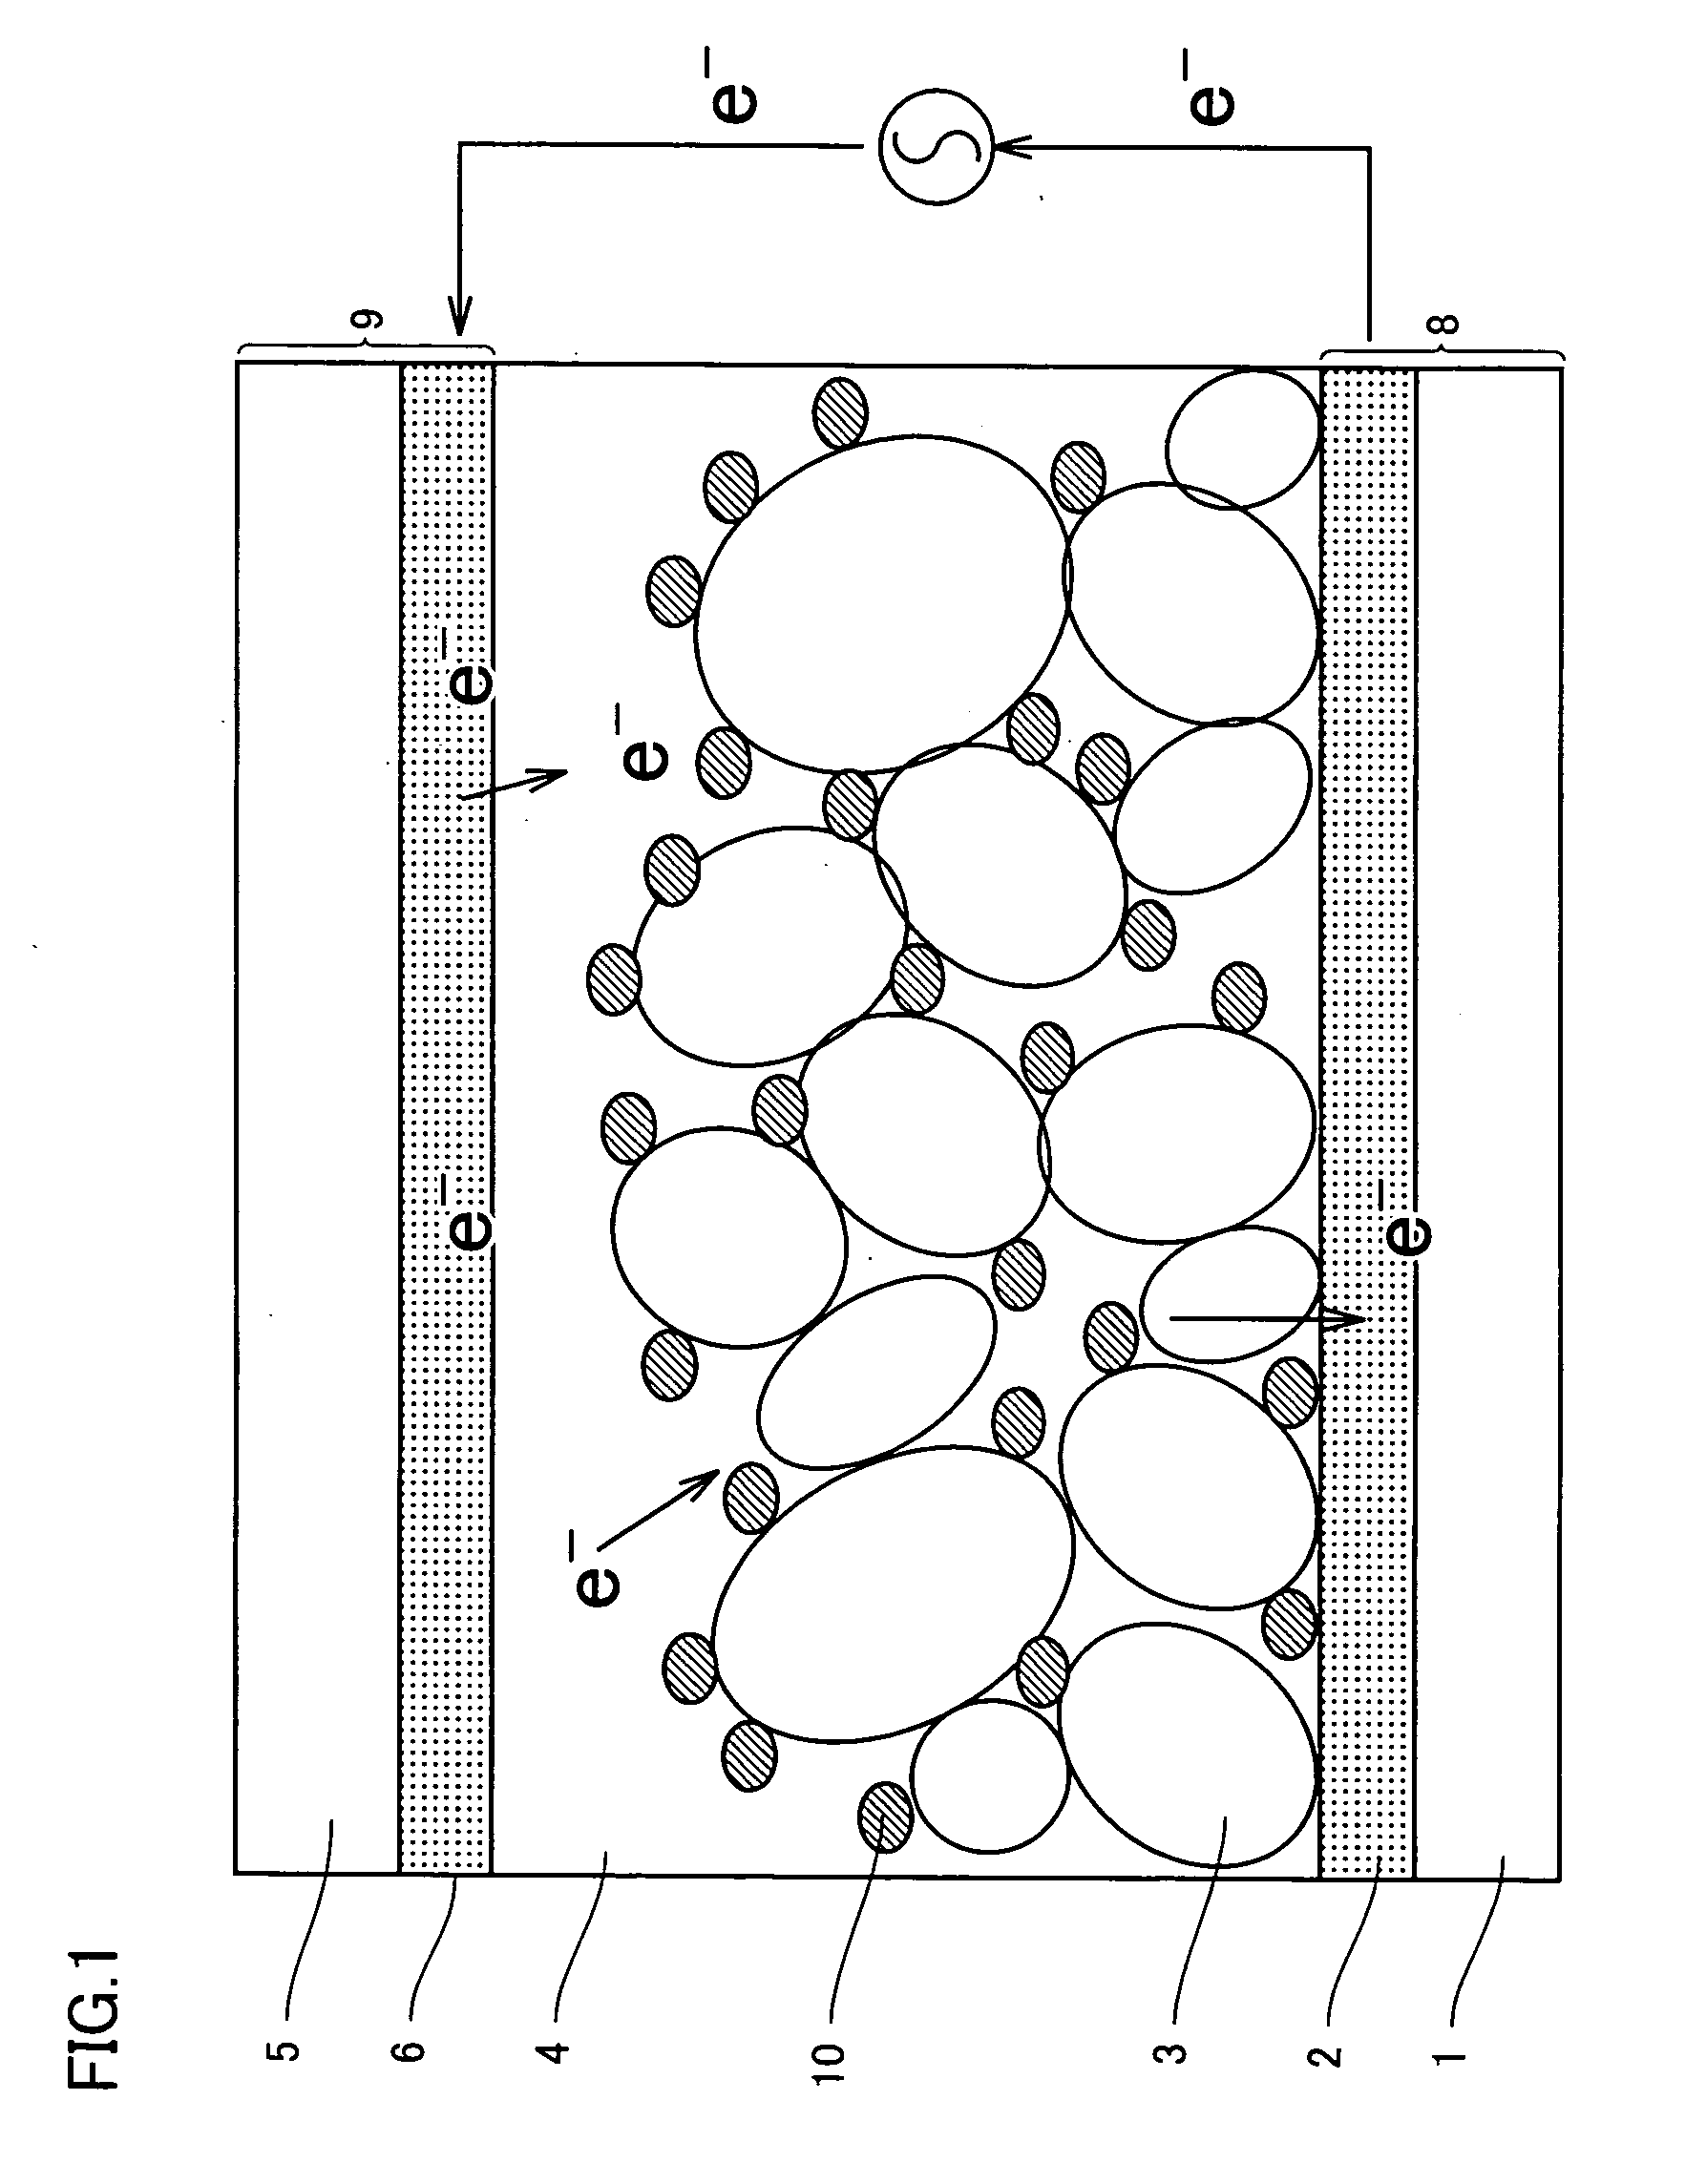 Photosensitizing transition metal complex containing quaterpyridine and photovoltaic cell with the metal complex